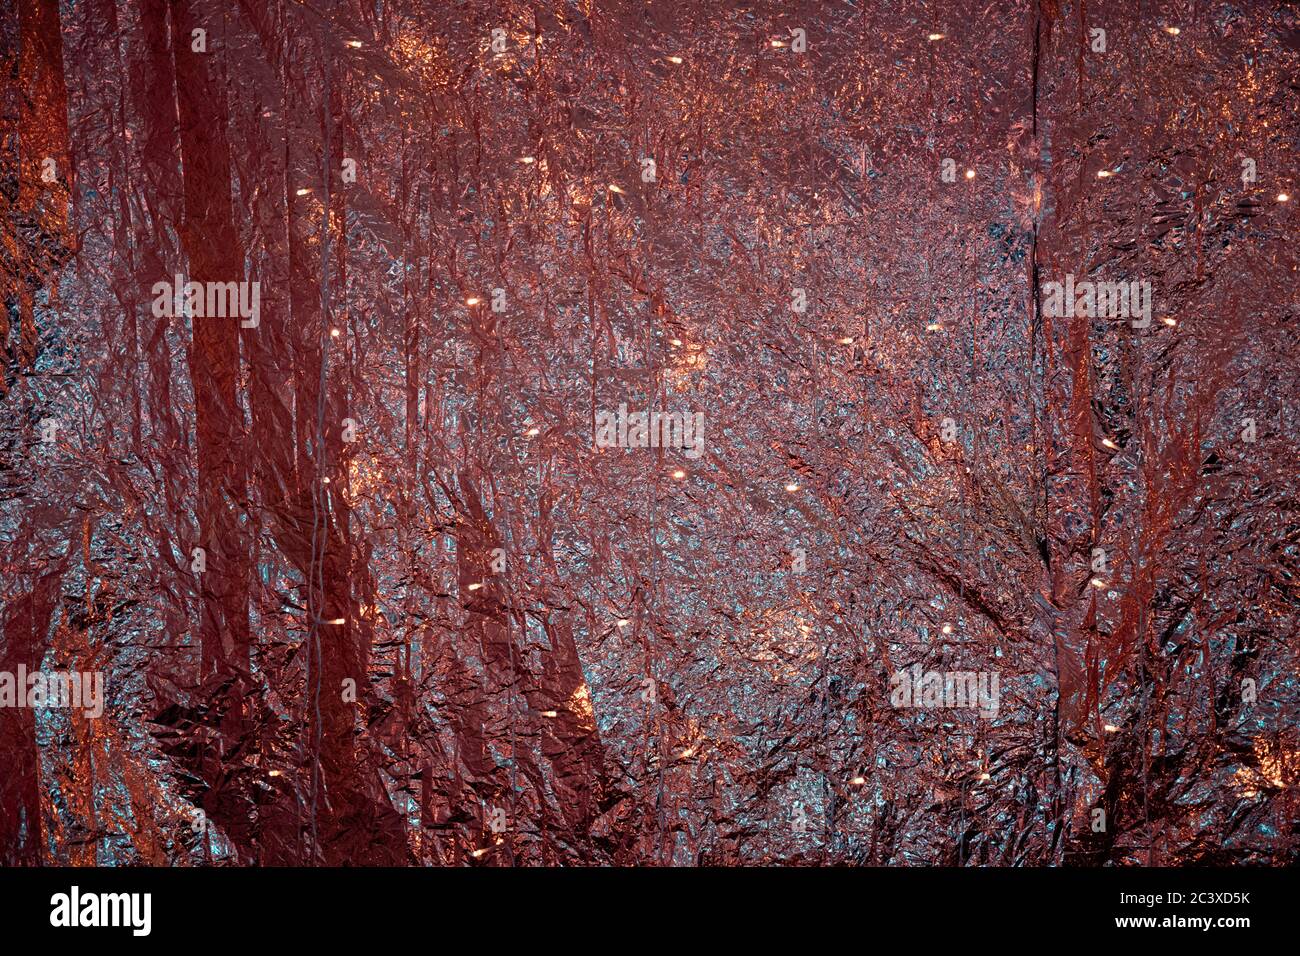 Red golden metallic rumpled foil backdrop with shiny lights.  Glitter texture of folded metallic fabric. Bright shimmer Christmas glowing background. Stock Photo